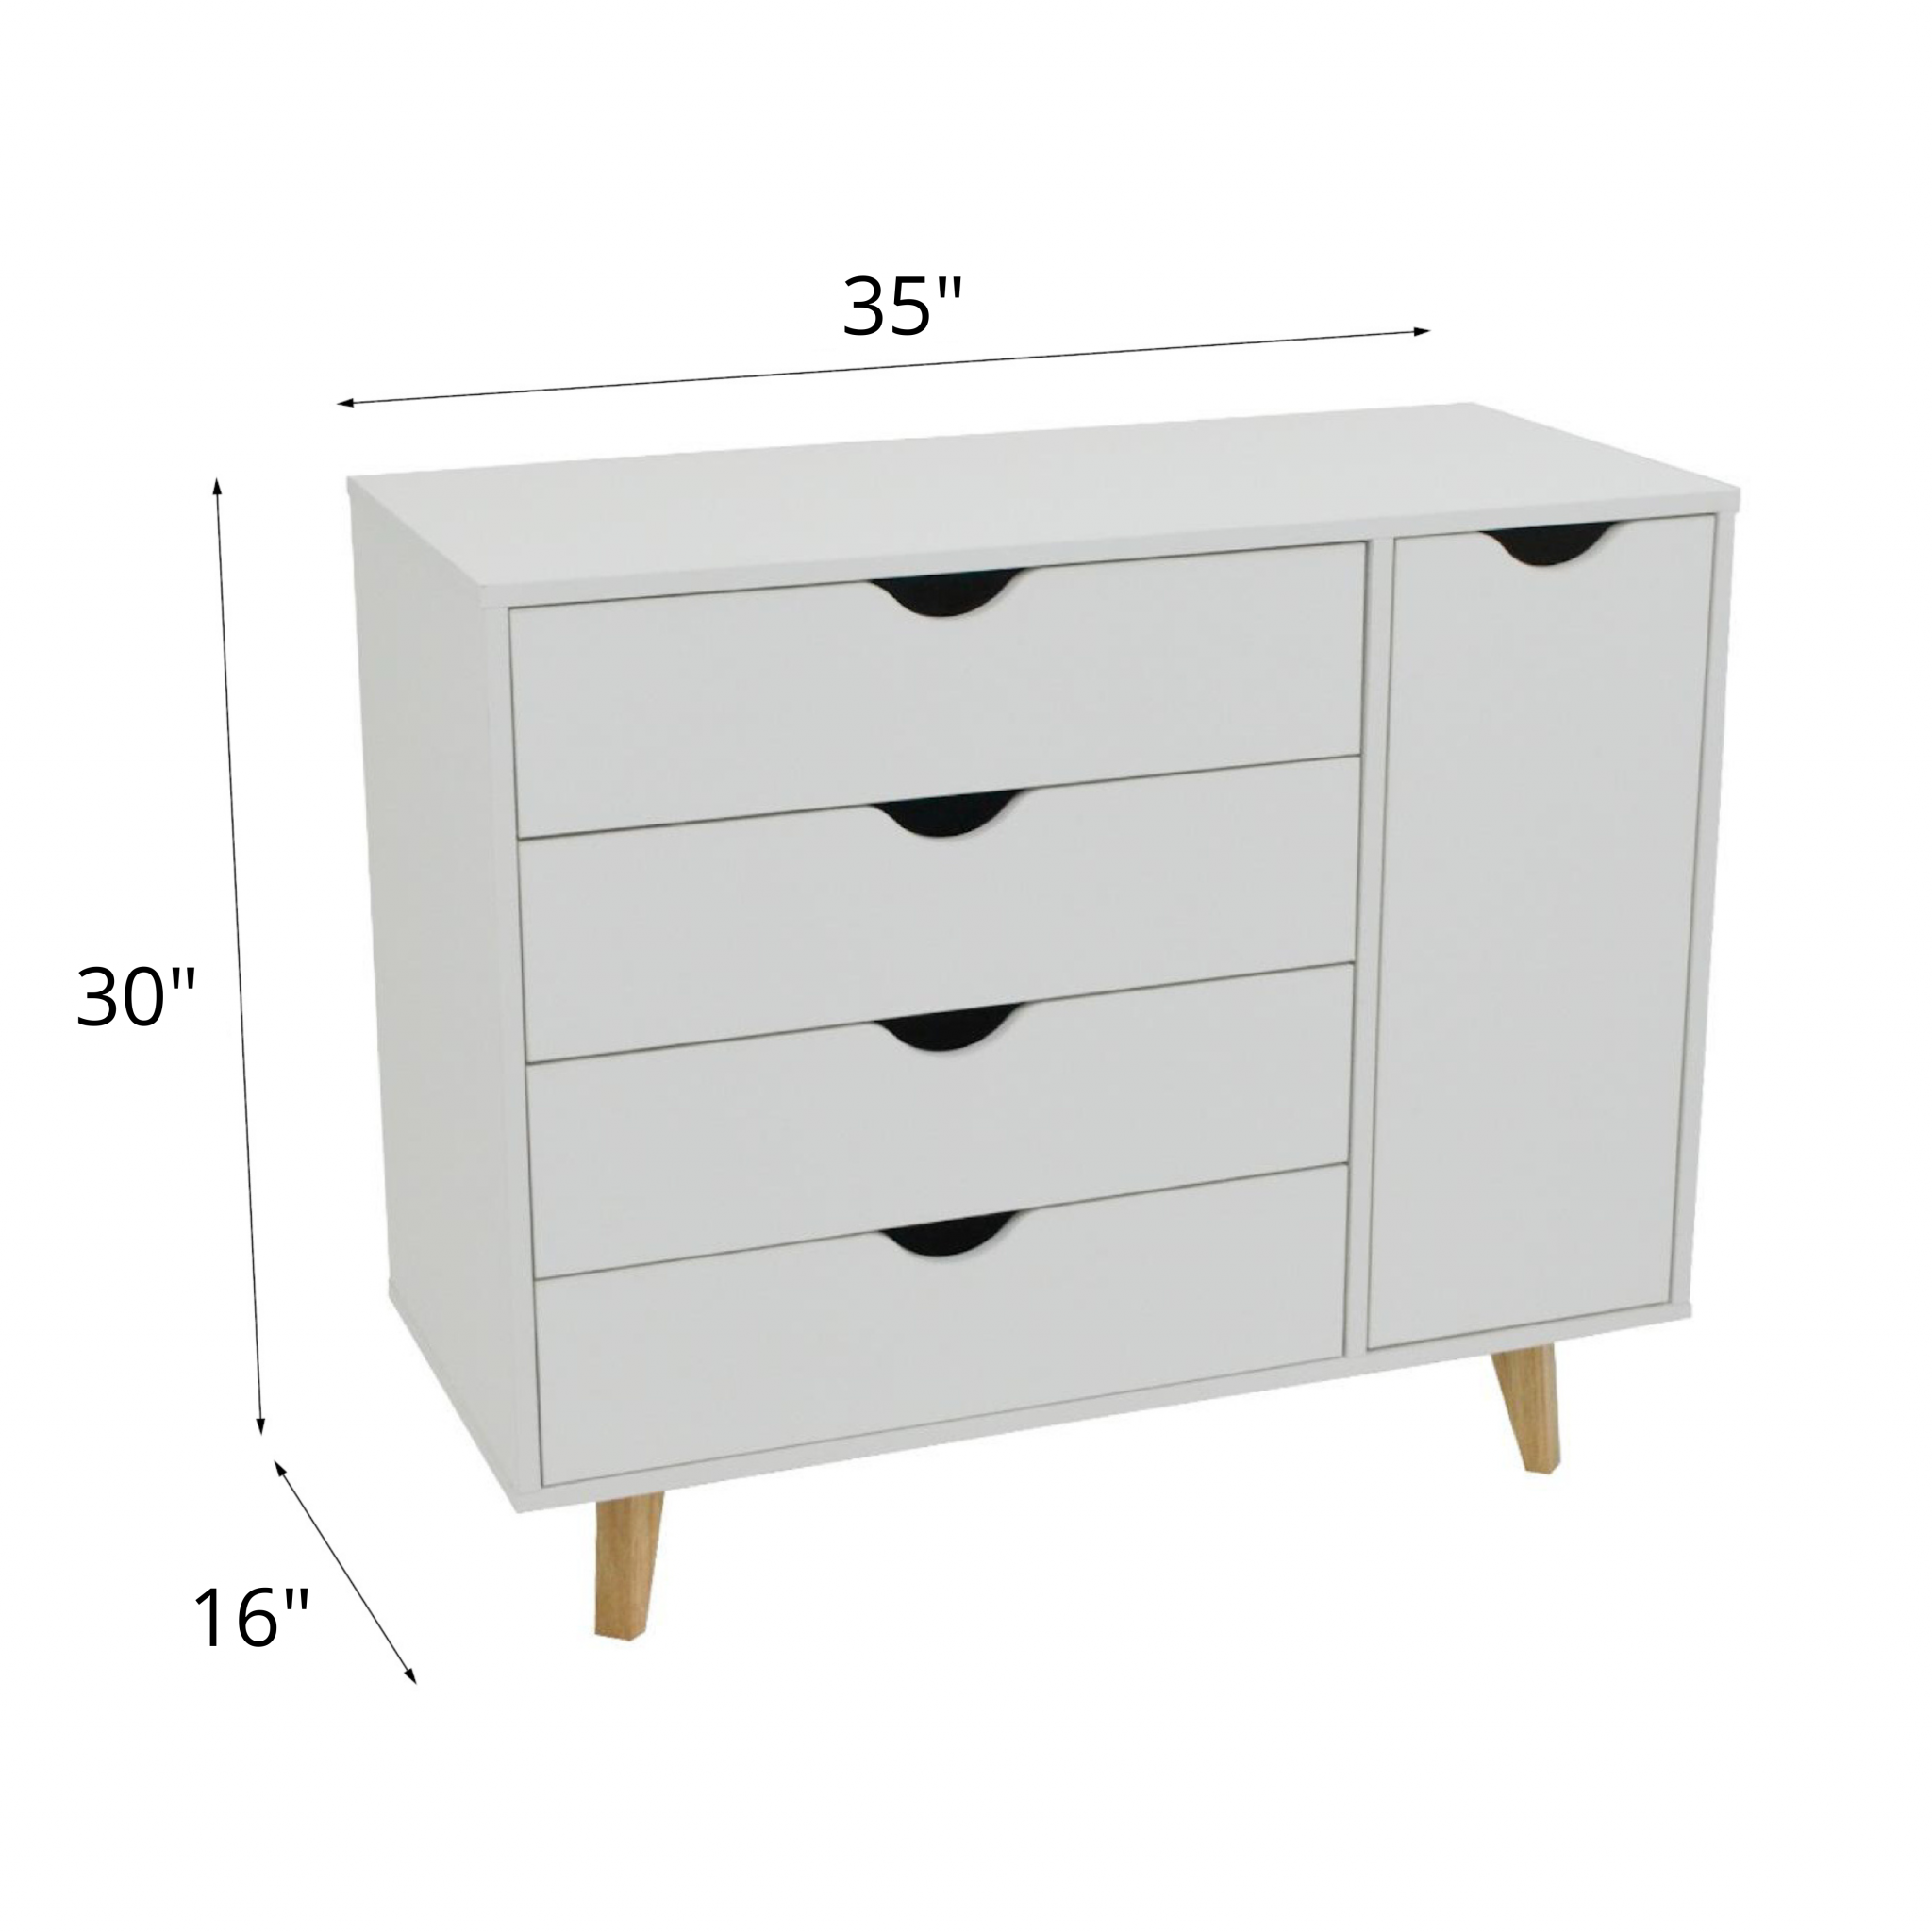 35" White Solid Wood Four Drawer Combo Dresser